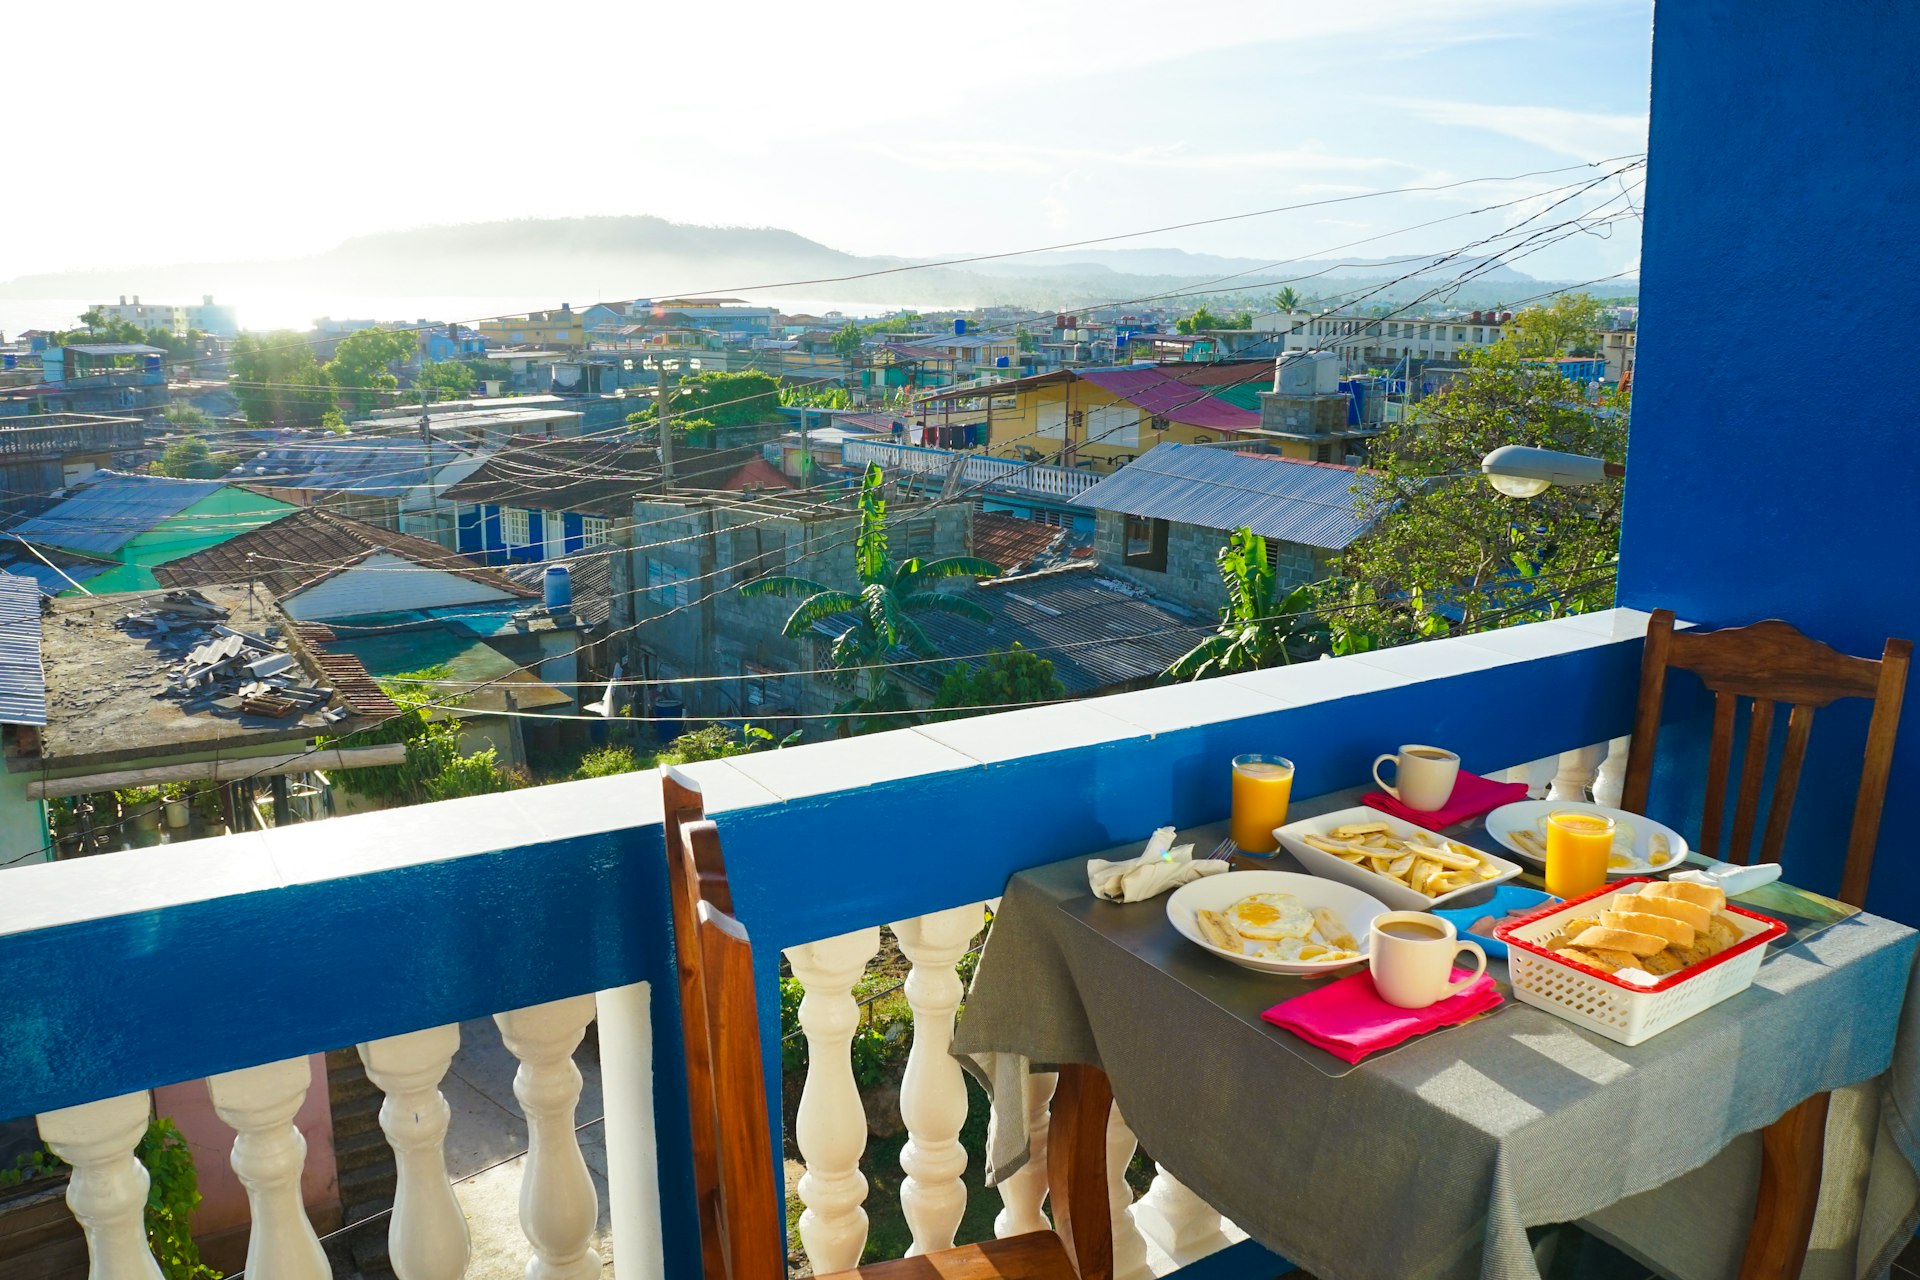 Breakfast is laid out on a table overlooking the Cuban city of Baracoa